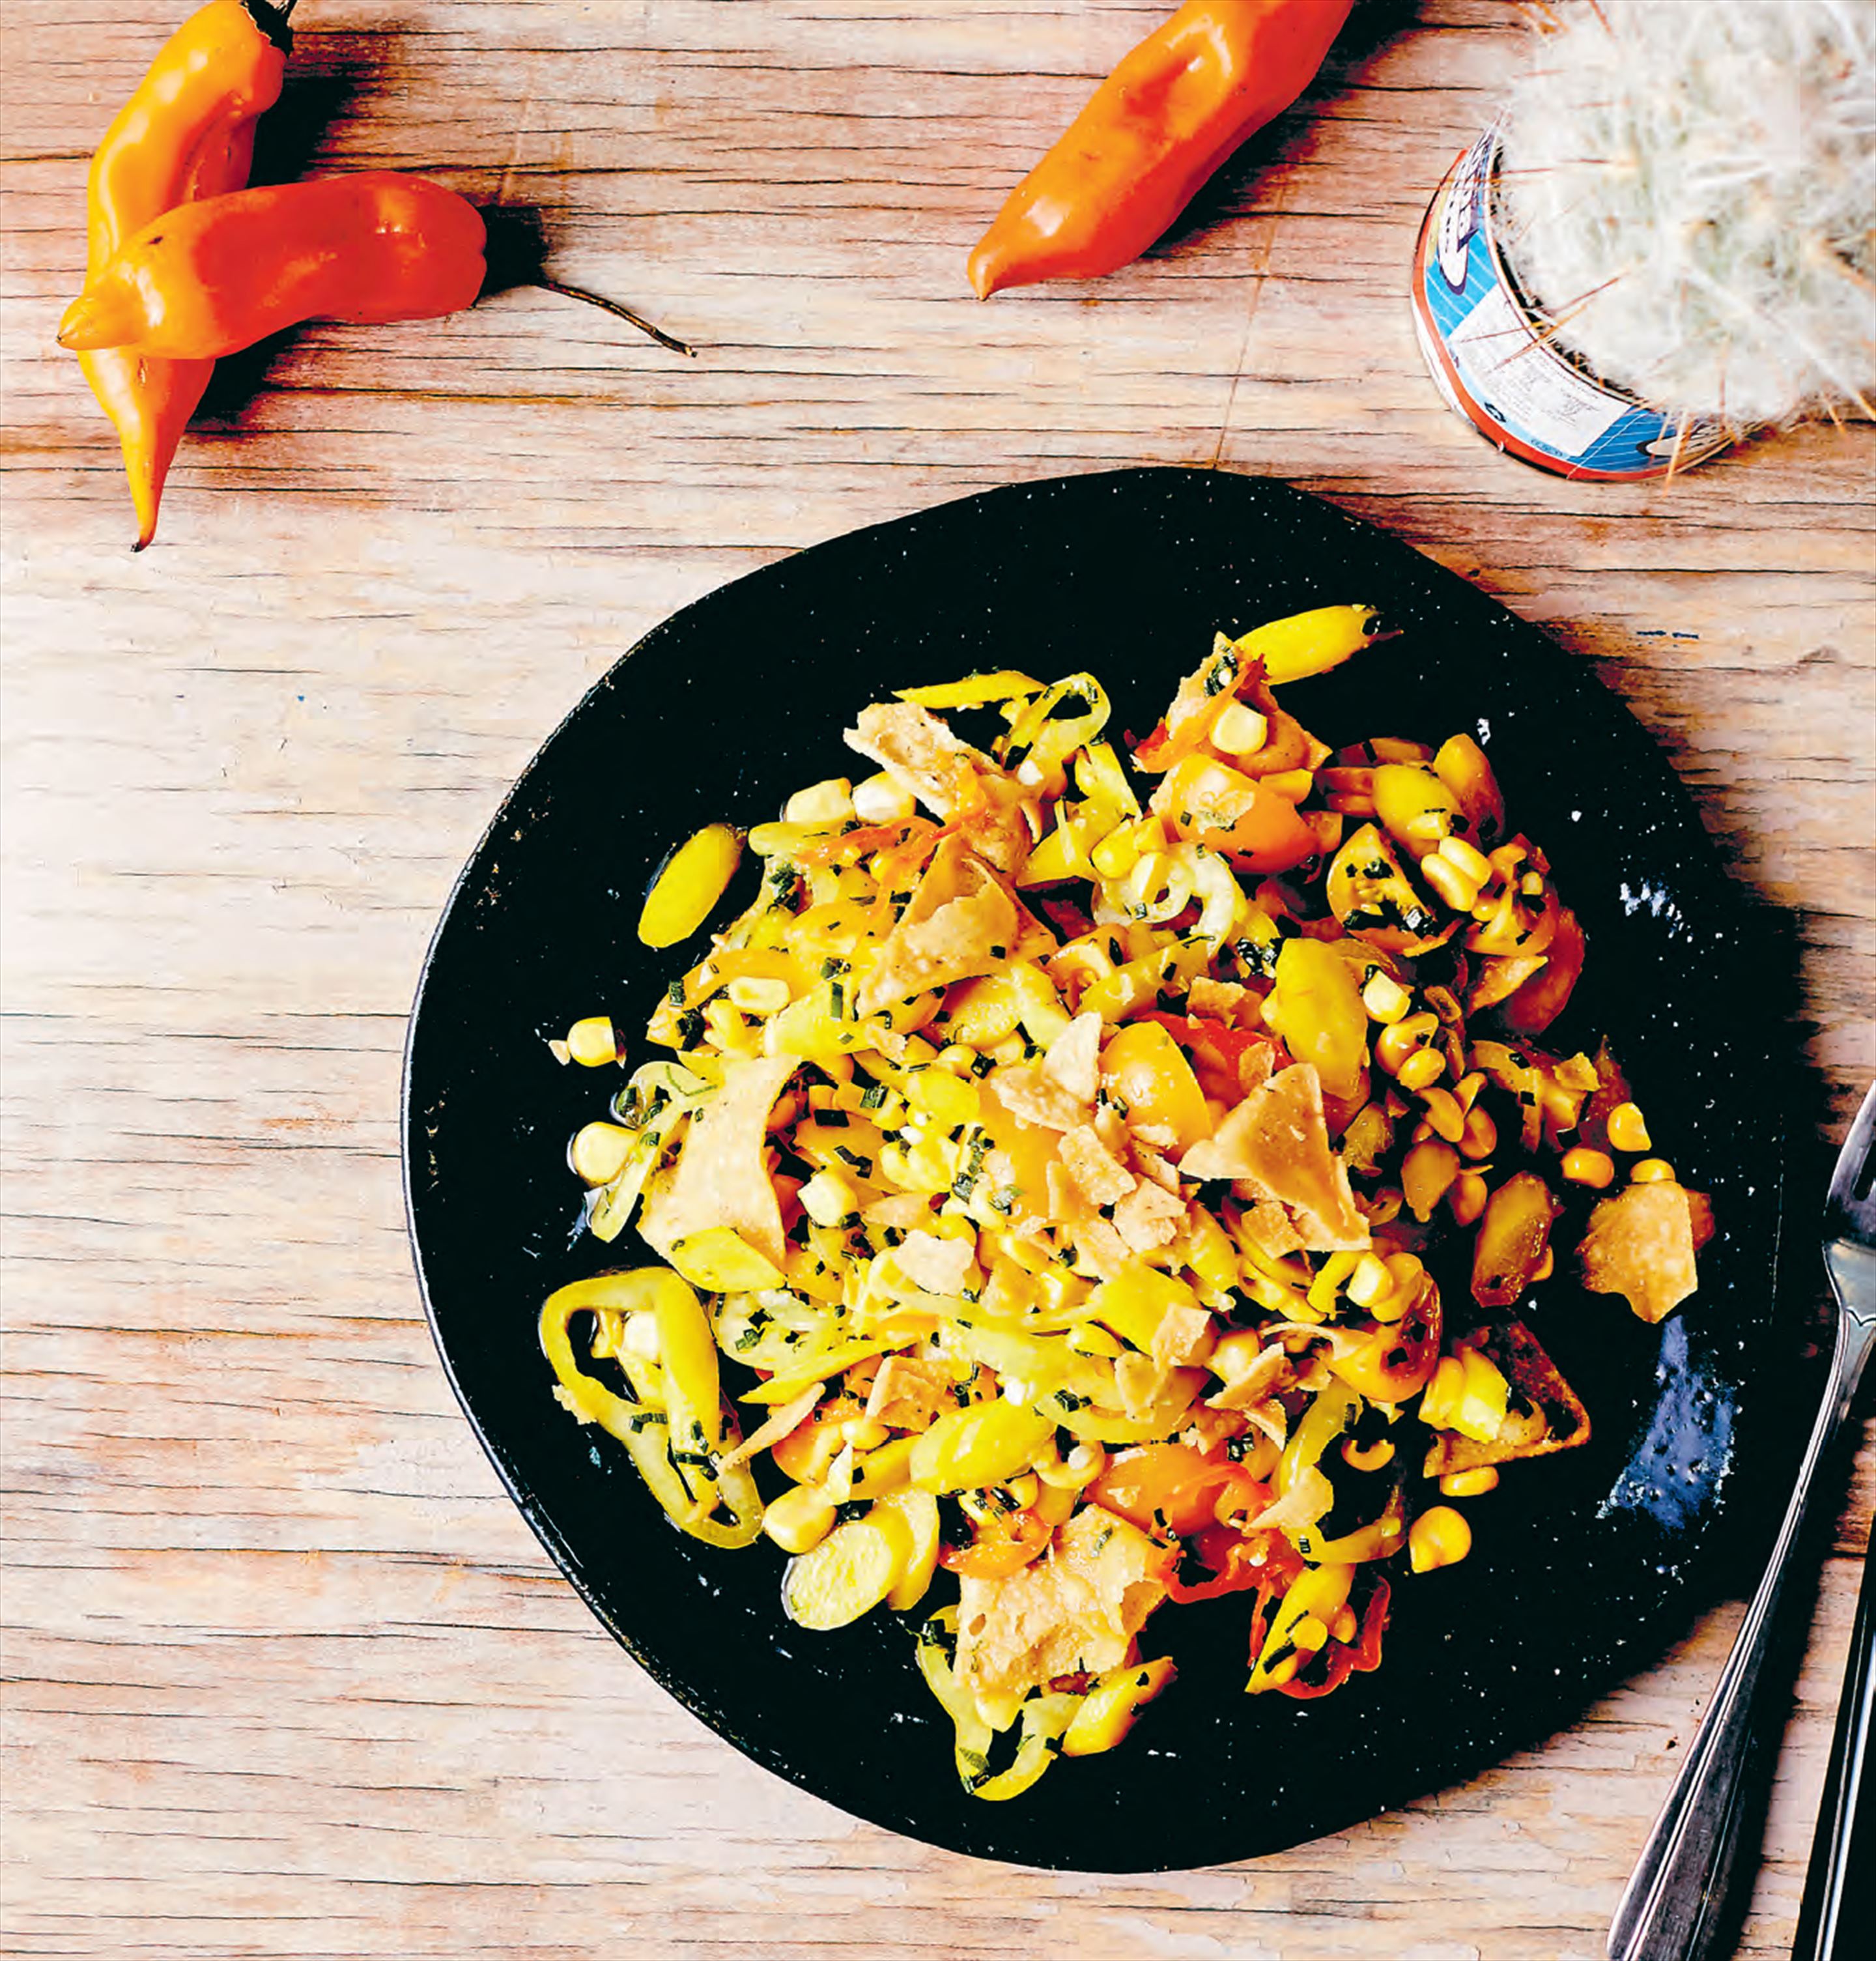 Young carrot, corn, amarillo & yellow tomato salad with smashed tortillas